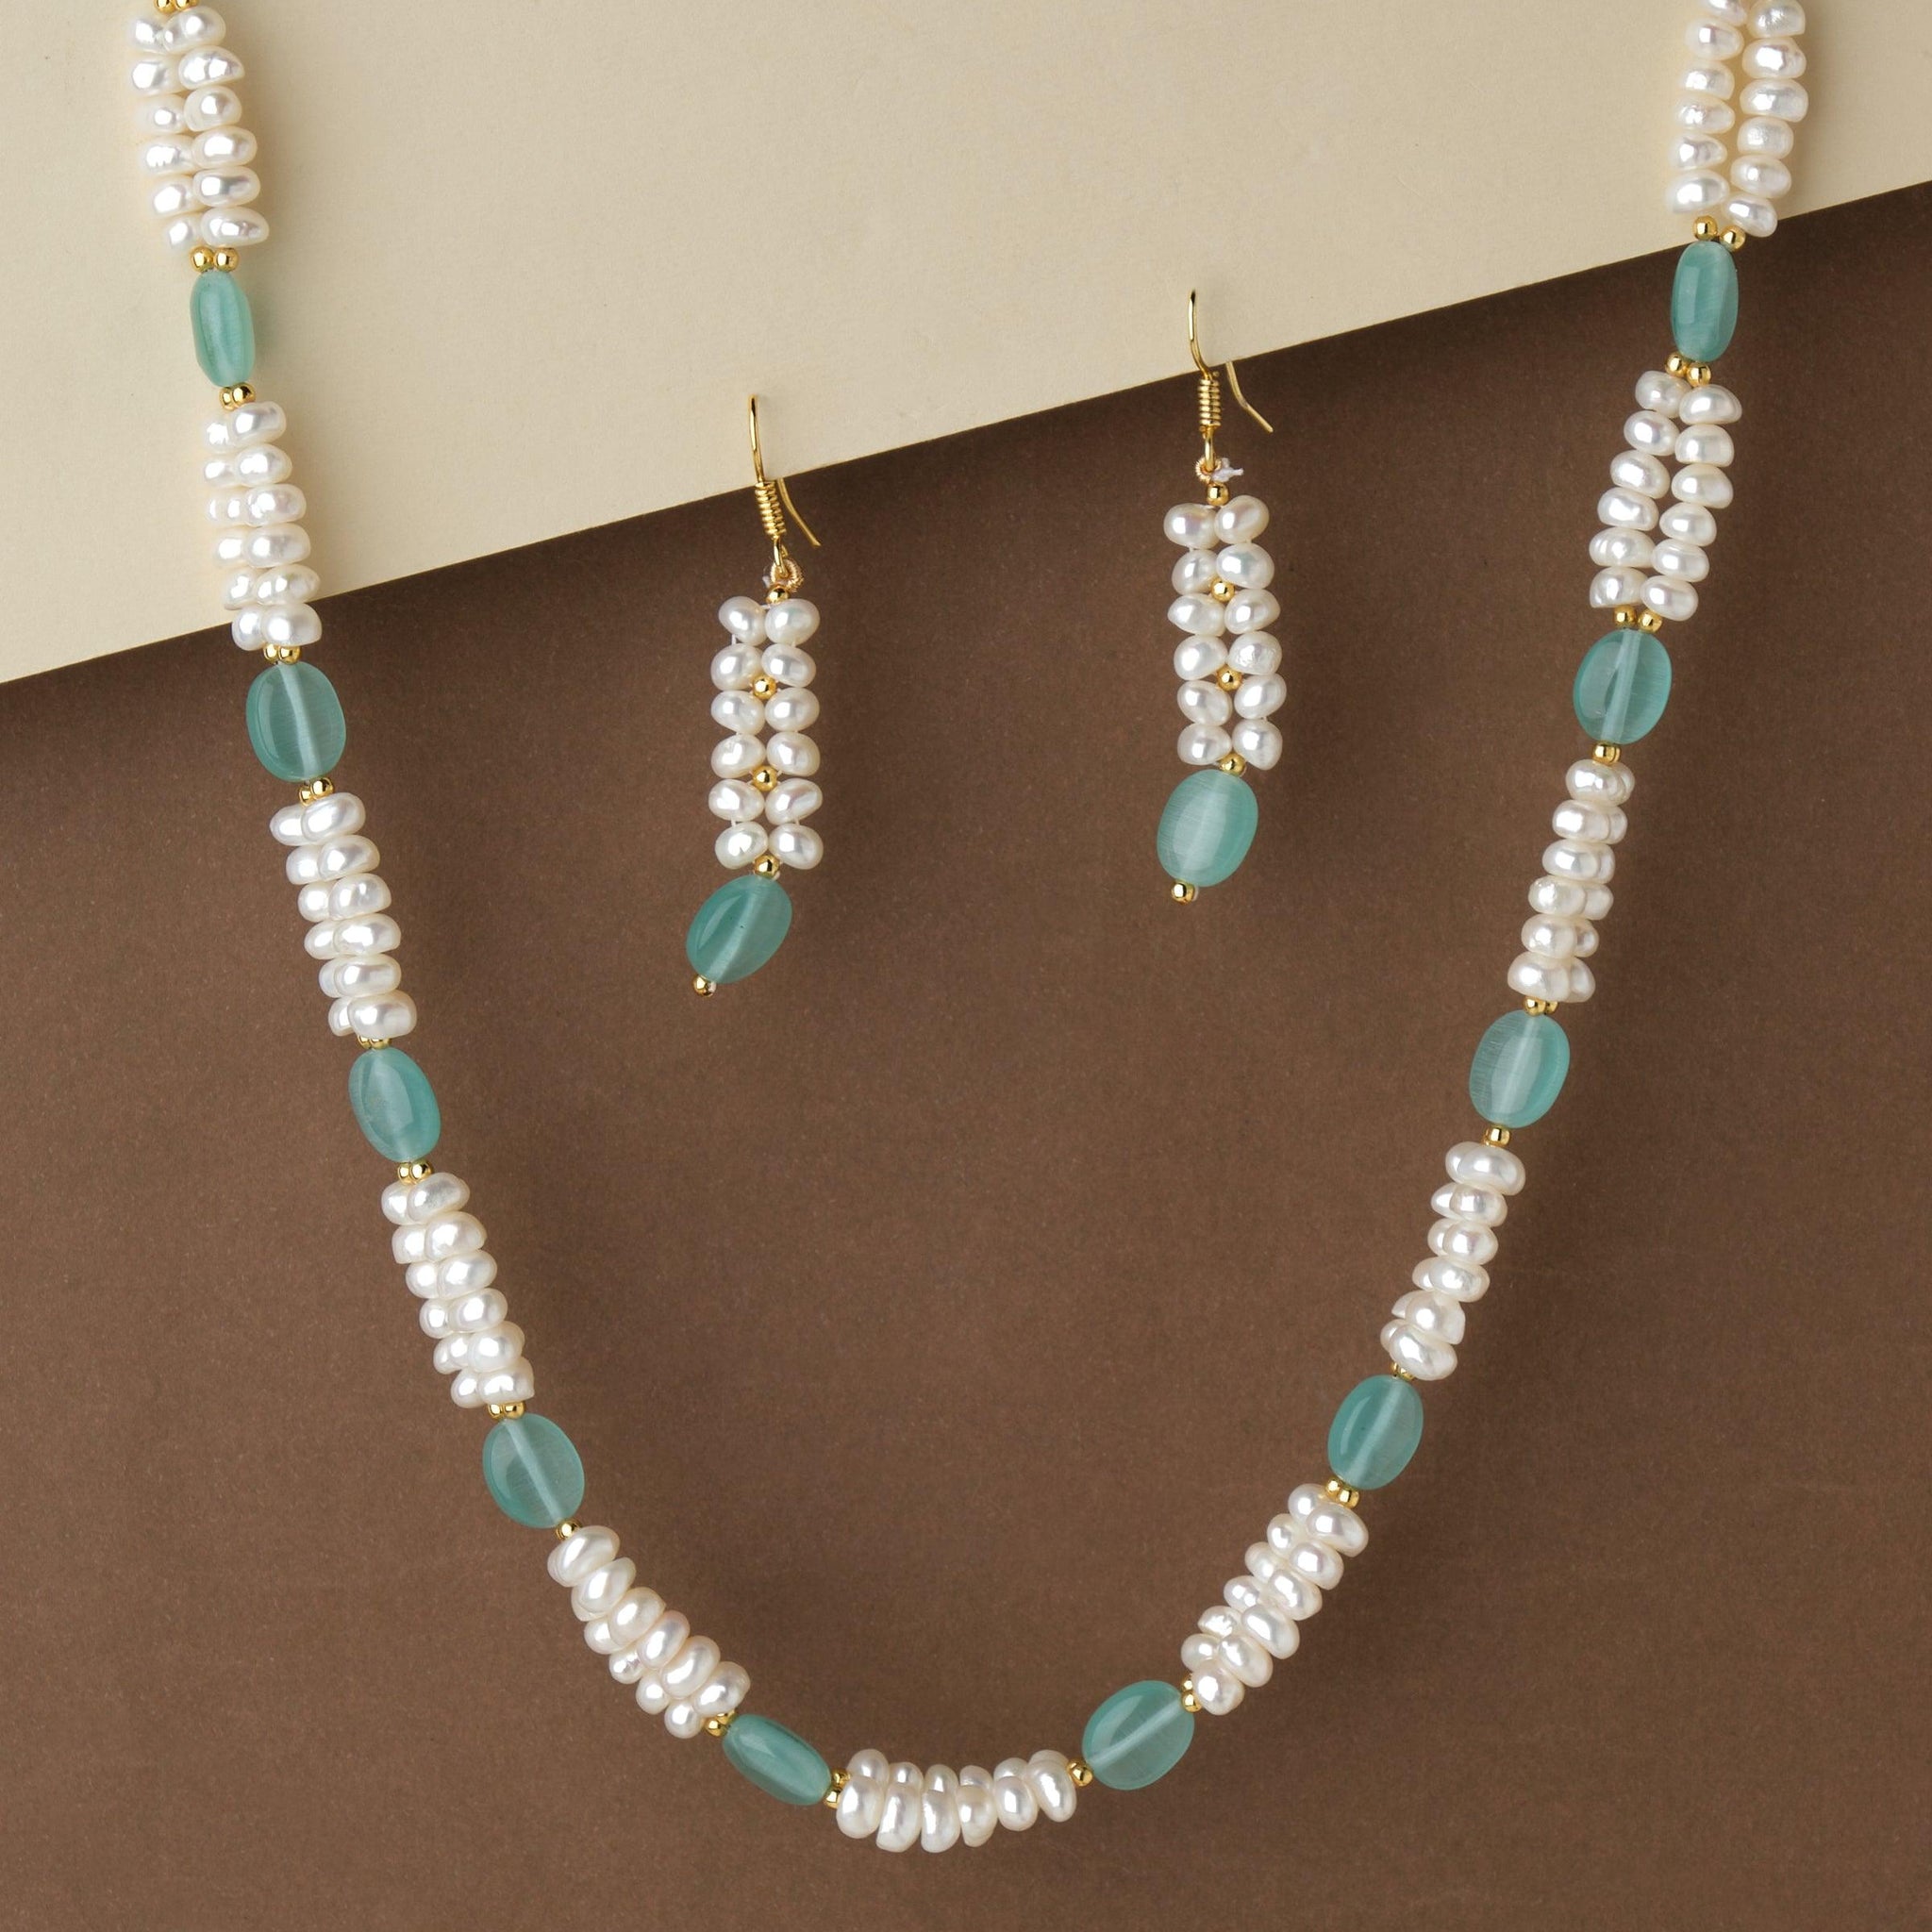 Simple Pearl & Beads Necklace Set - Chandrani Pearls